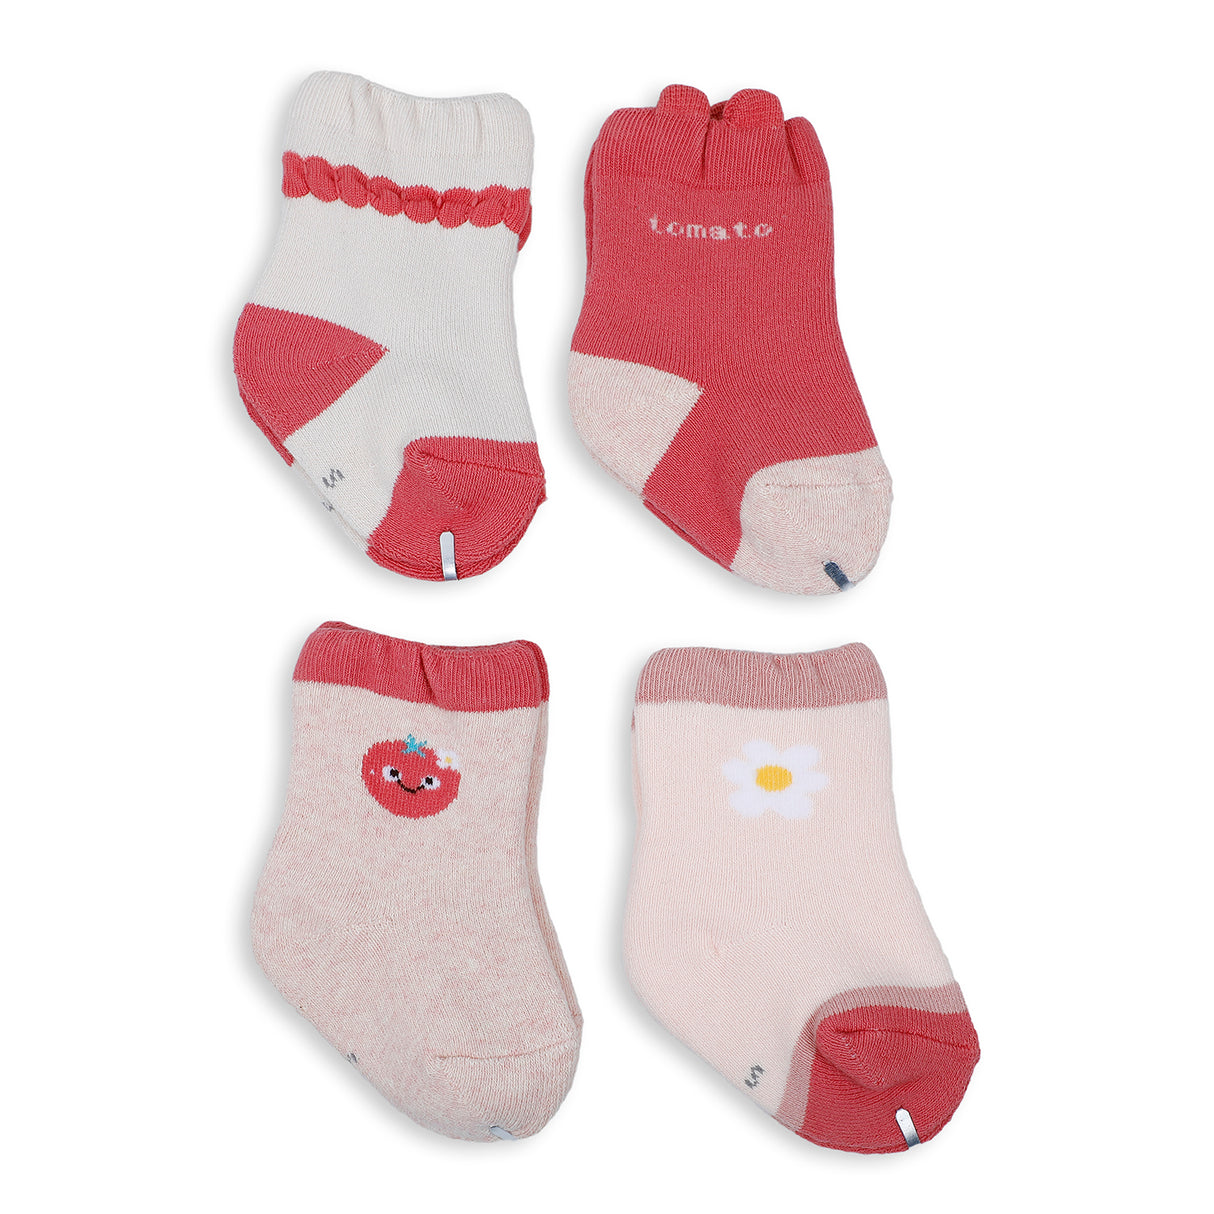 Warm And Cozy Infant Cotton Socks